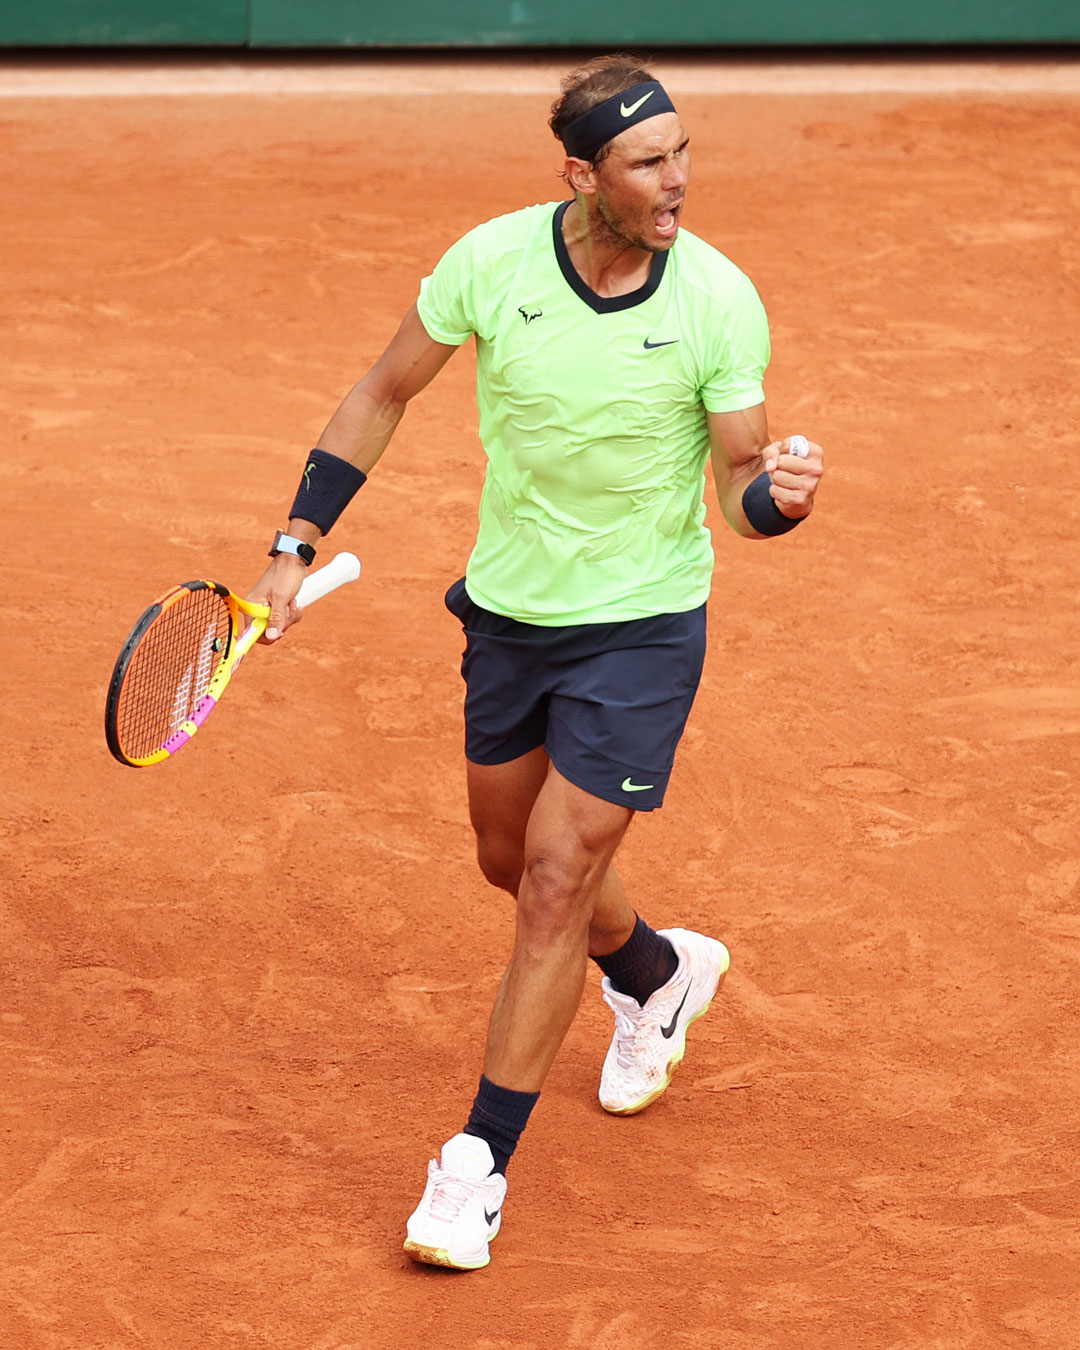 French Open 2021 Nadal sails into round 4, defeats Cameron Norrie